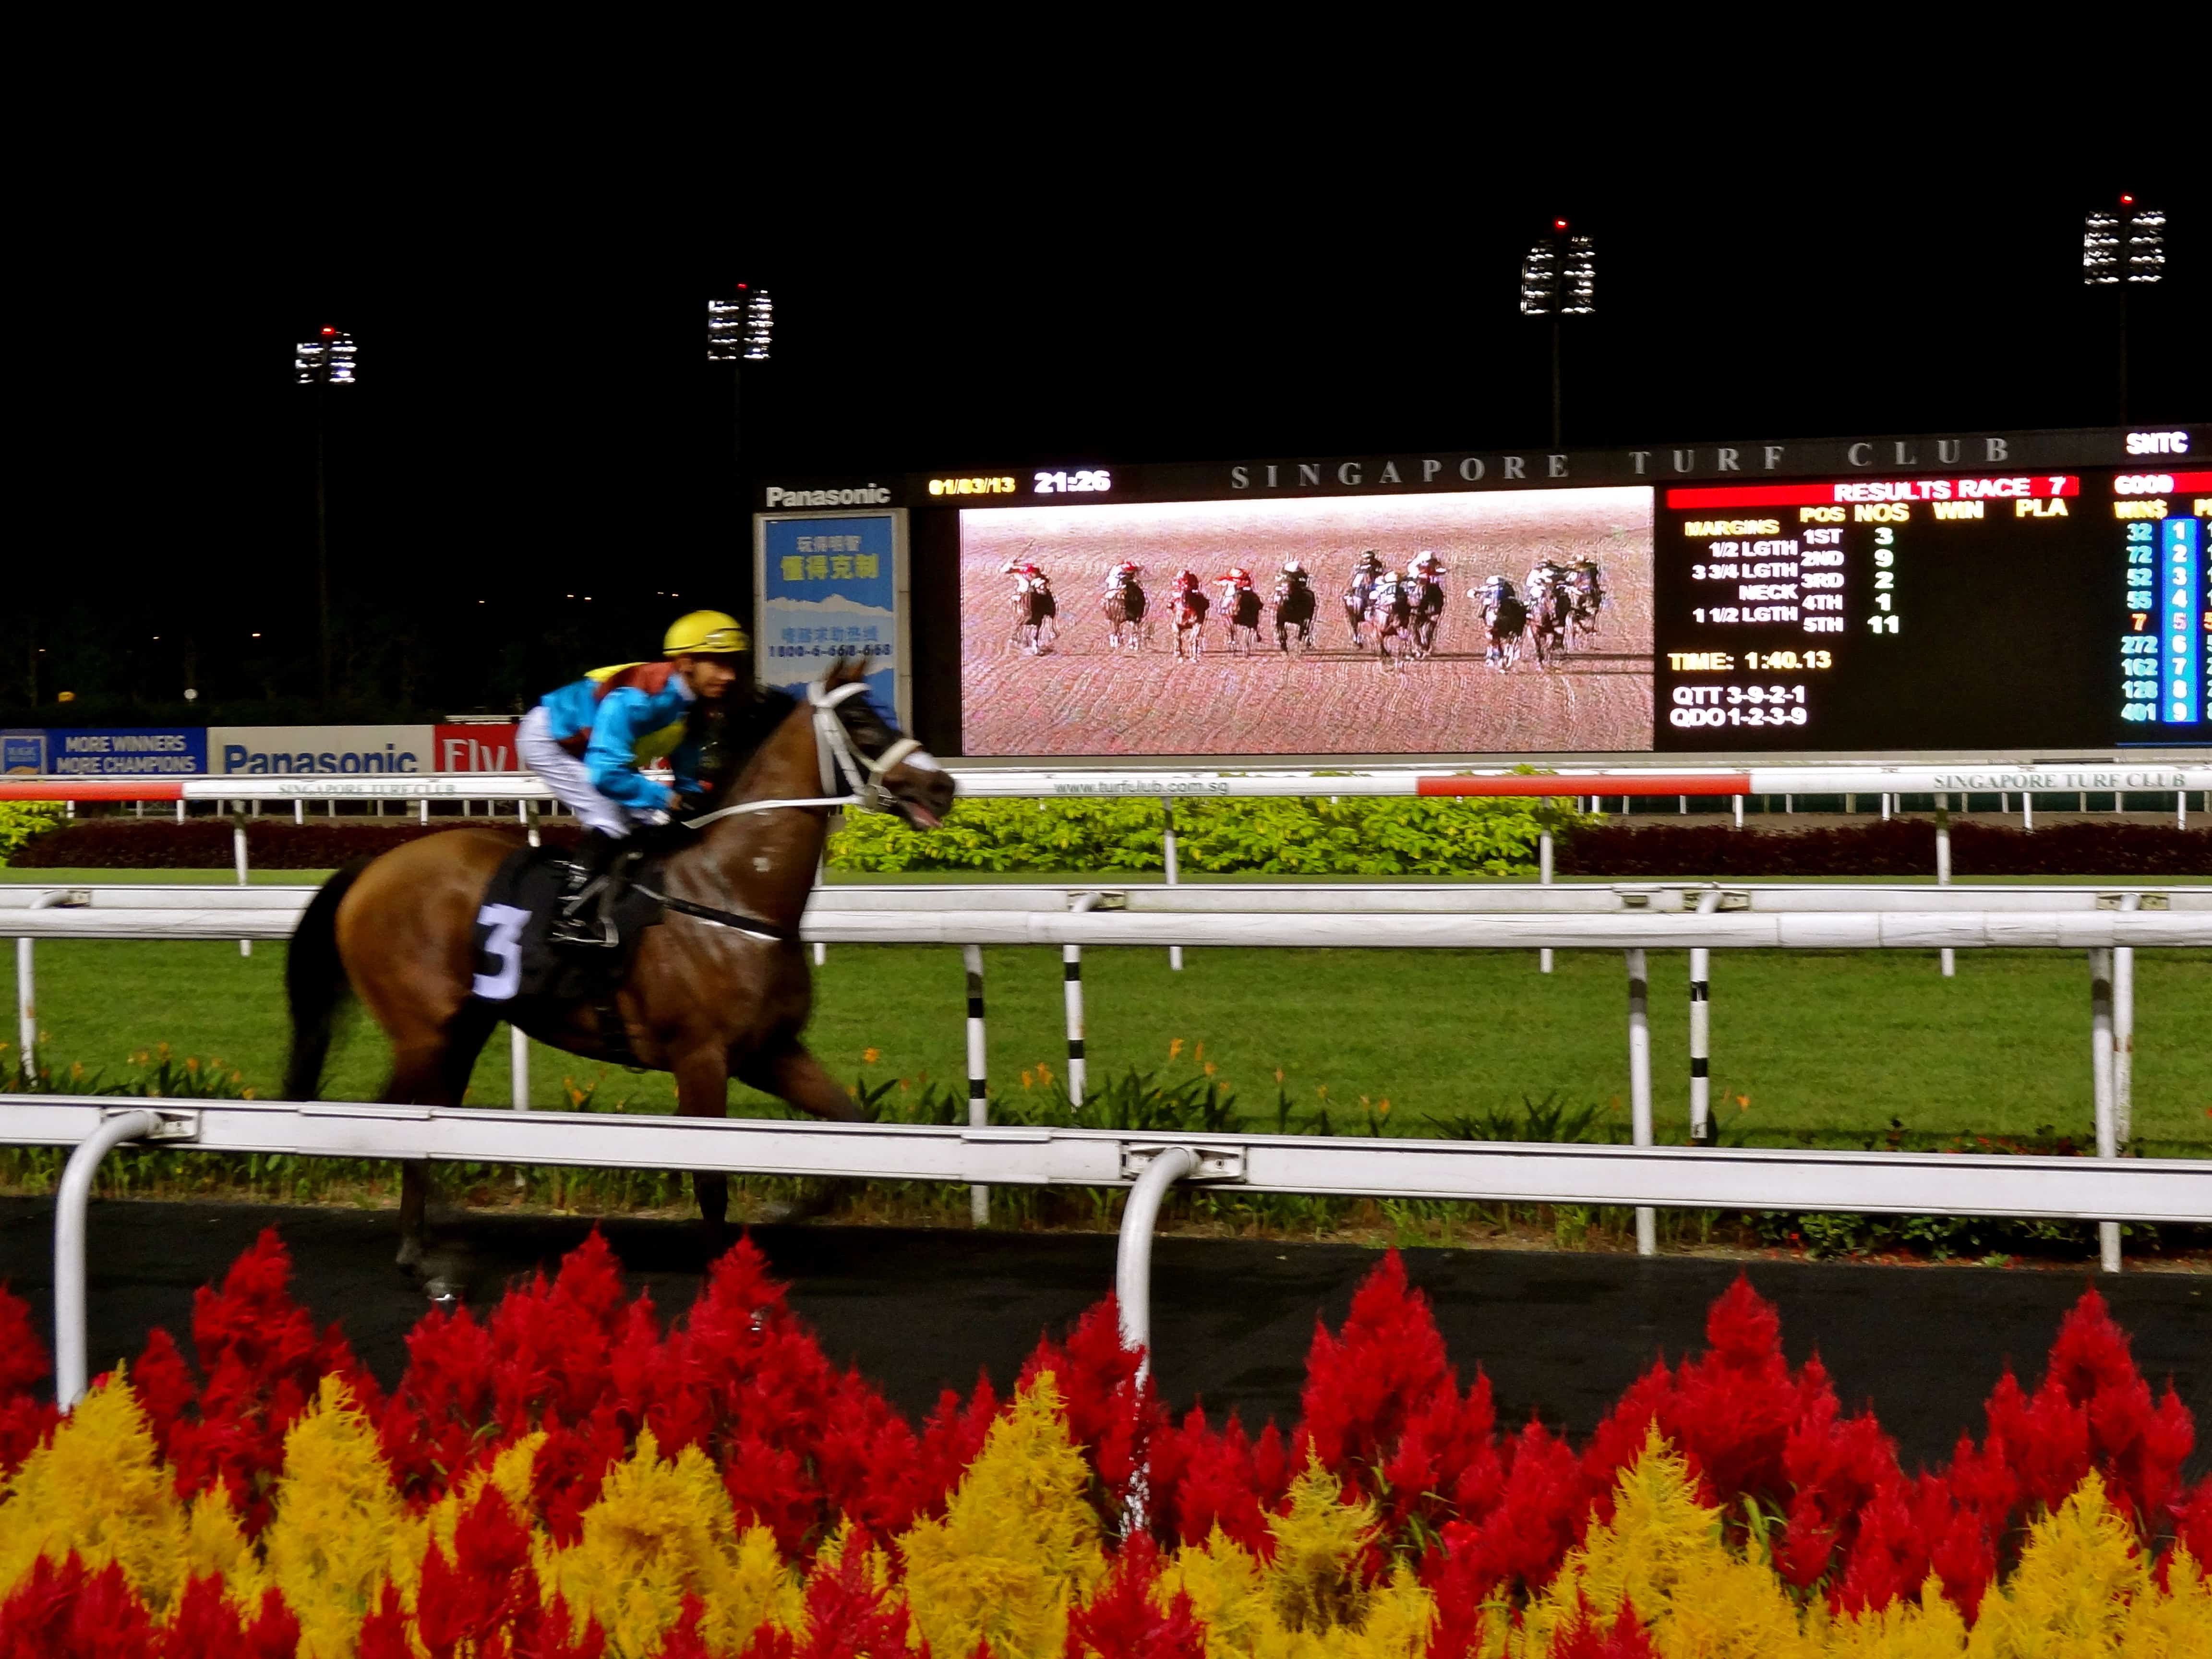 Singapore turf club, cool things to do in singapore